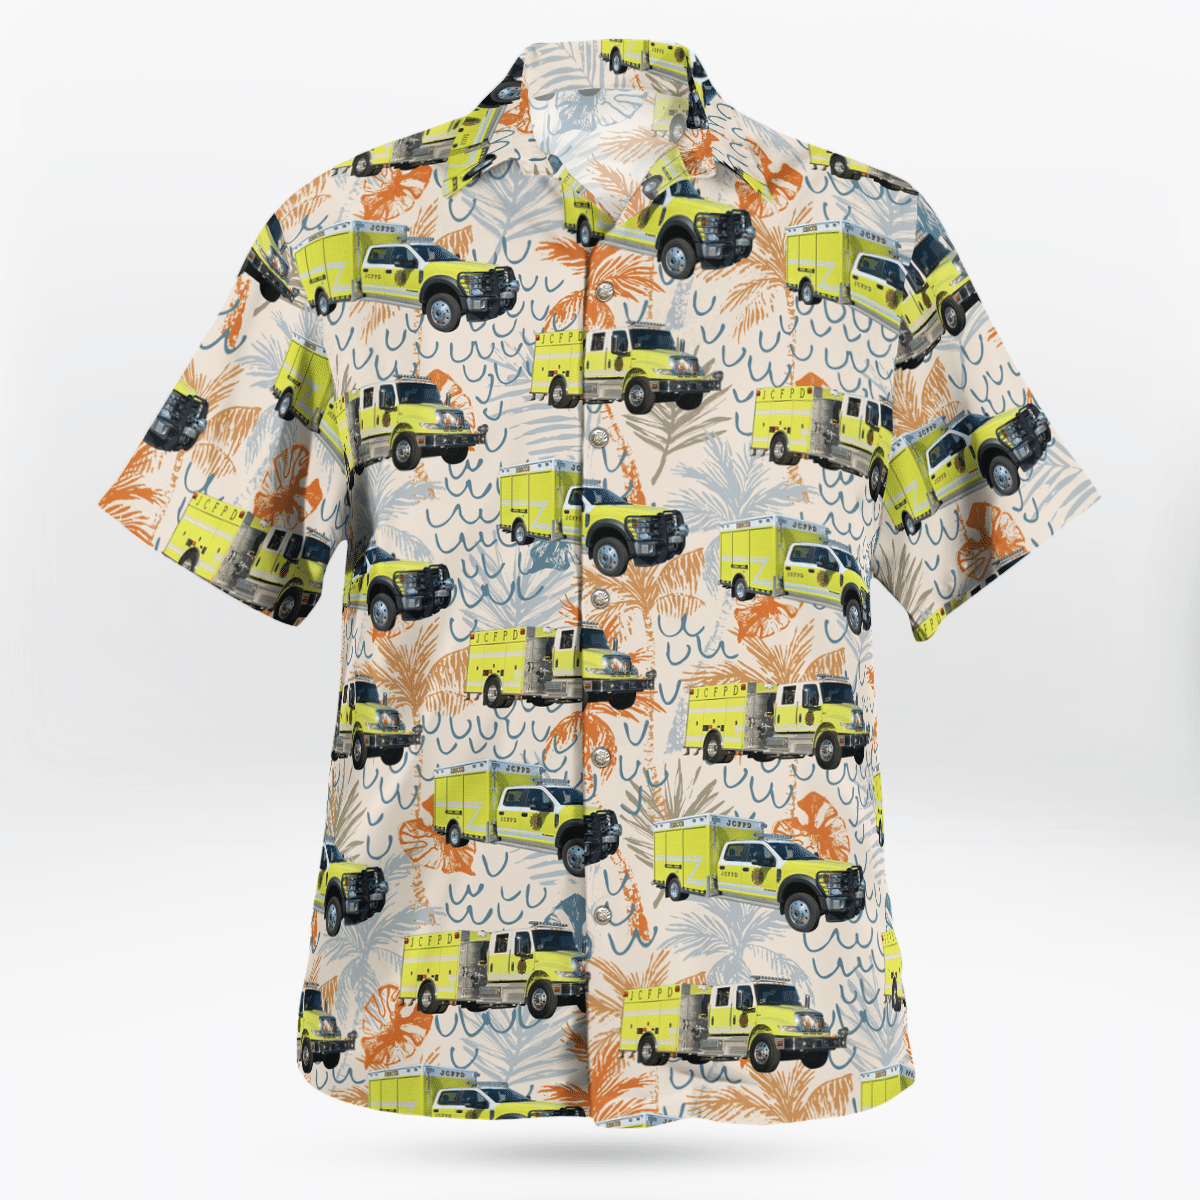 Hawaiian shirts never go out of style 184